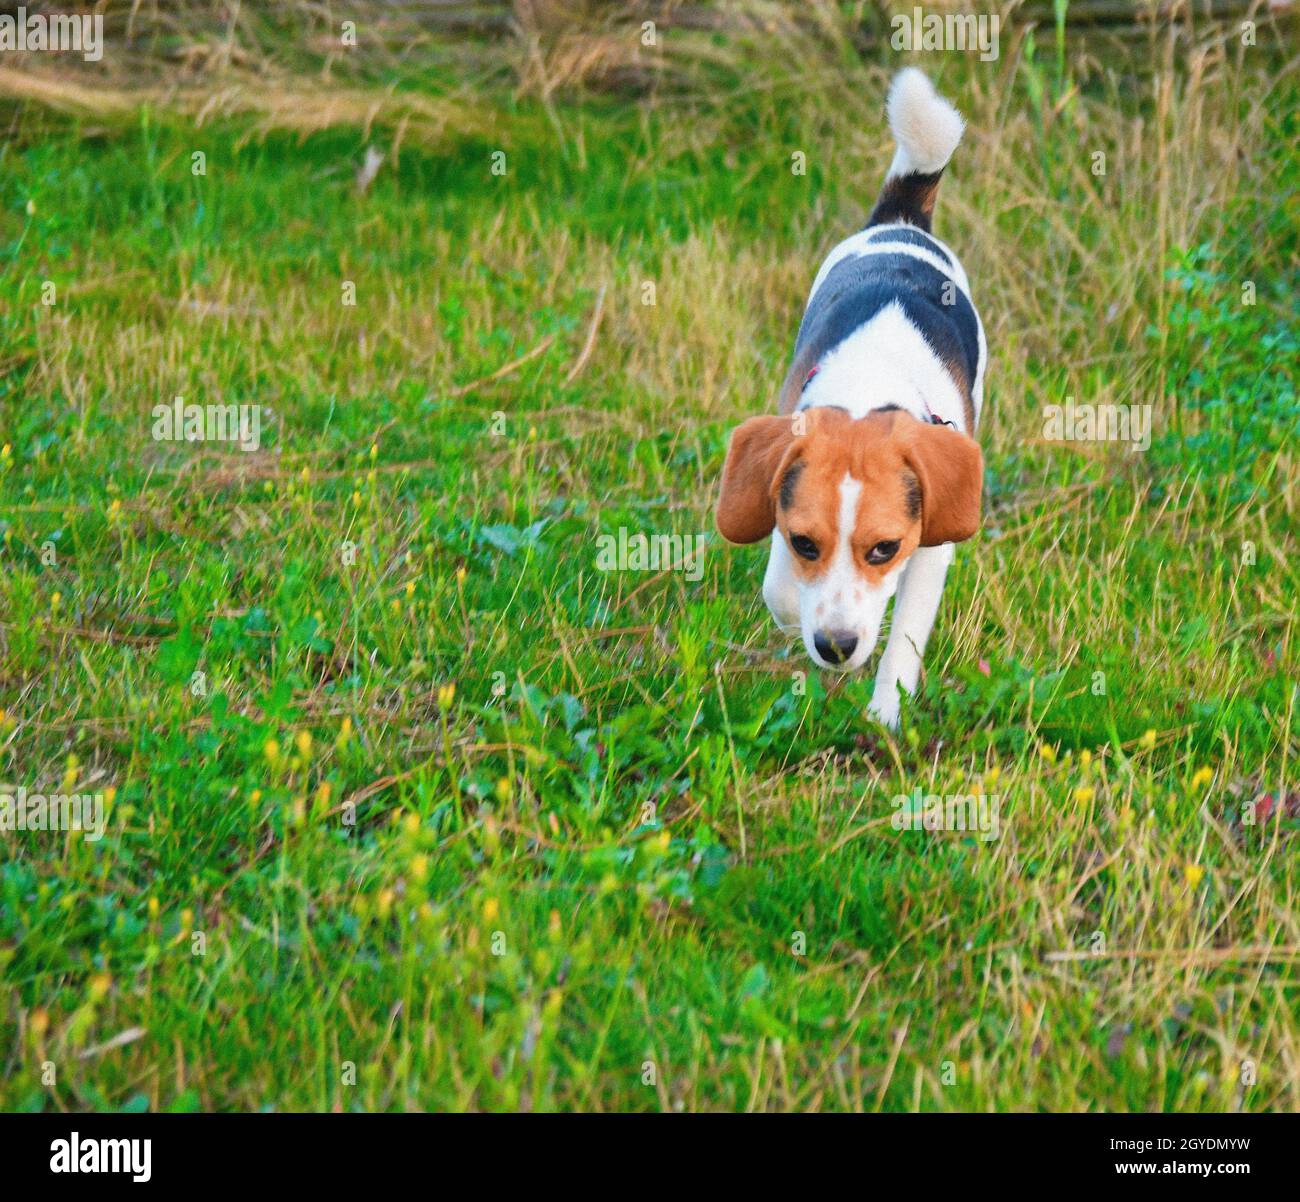 Beagle dog running through green meadow. Copy space domestic dog concept. Pet background. Puppy beagle dog in natural park. Stock Photo